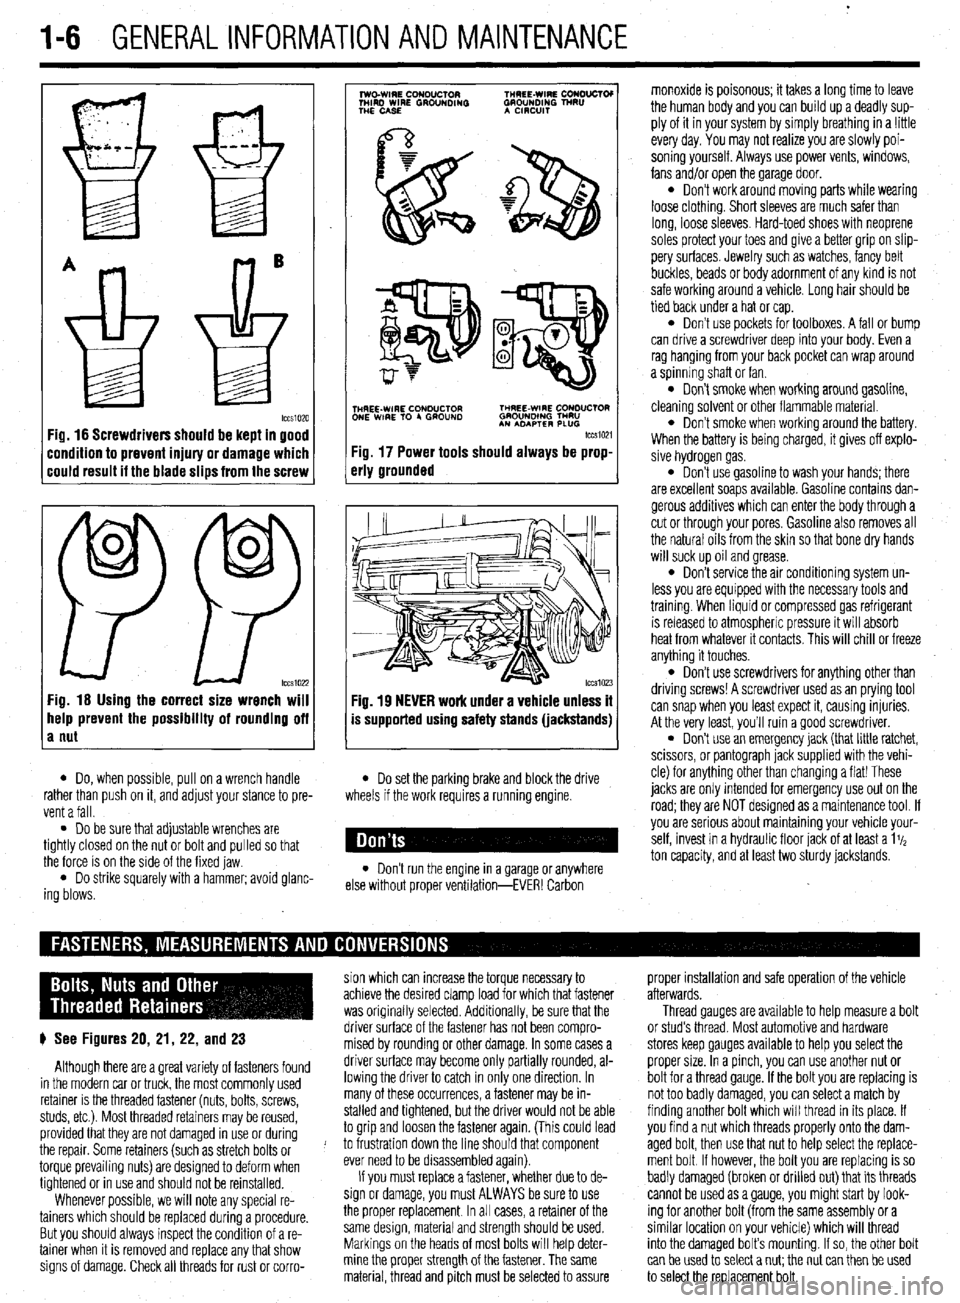 MITSUBISHI DIAMANTE 1900  Repair Manual 1-6 GENERALINFORMATIONAND MAINTENANCE 
Fig. 16 Screwdrivers should be kept in good 
:ondition to prevent injury or damage which 
:ould result it the blade slips from the screw 
0 
0 
PP tccs1022 Fig. 